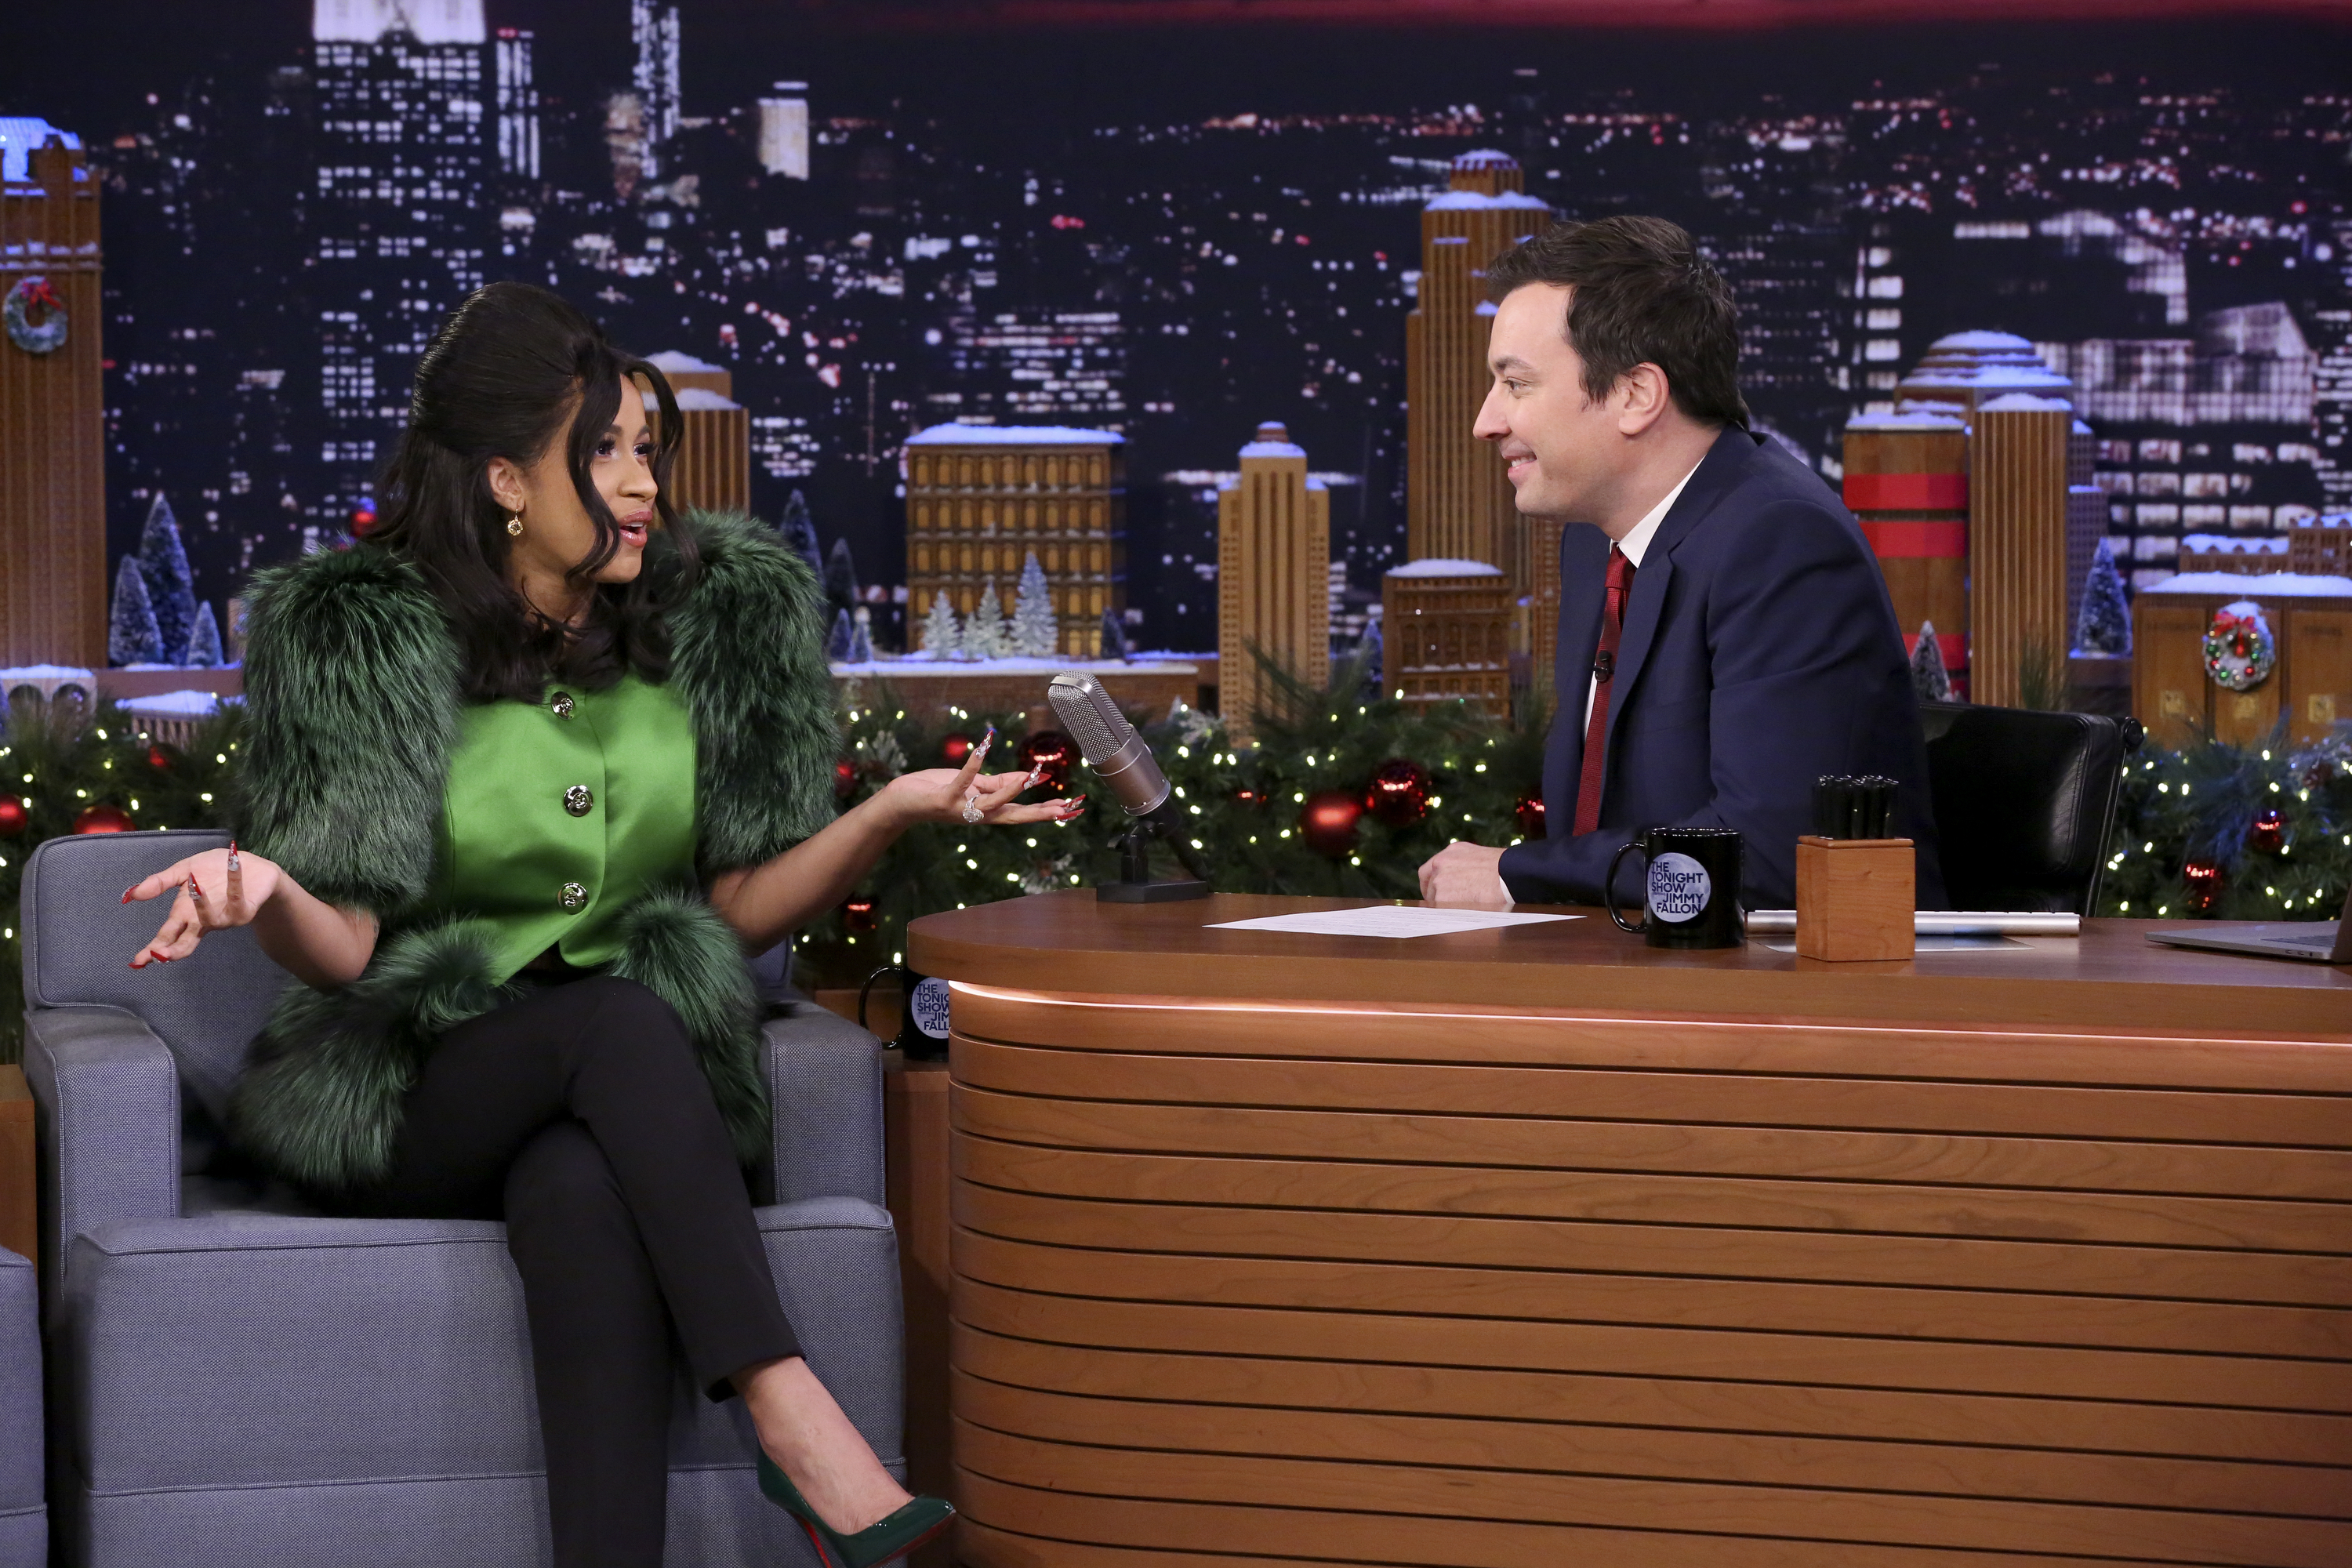 THE TONIGHT SHOW STARRING JIMMY FALLON -- Episode 0794 -- Pictured: (l-r) Hip Hop Artist Cardi B during an interview with his Jimmy Fallon on December 20, 2017 -- (Photo by: Andrew Lipovsky/NBC/NBCU Photo Bank via Getty Images) (NBC—NBCU Photo Bank via Getty Images)